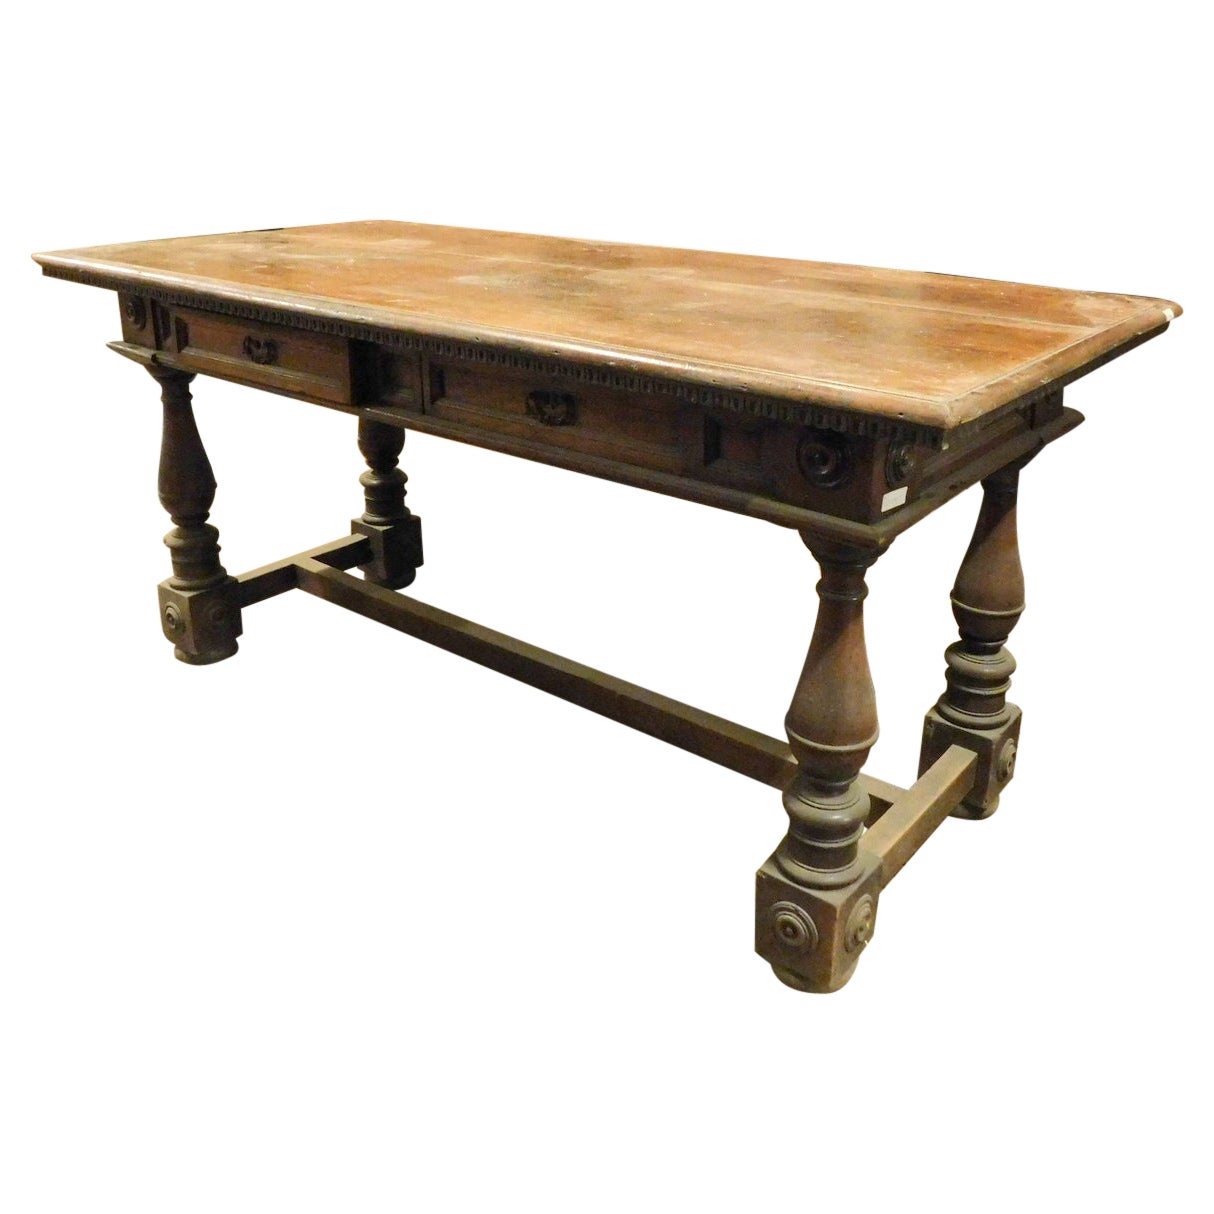 Vintage Walnut Table with Drawers, First Quarter of the 20th Century, Italy